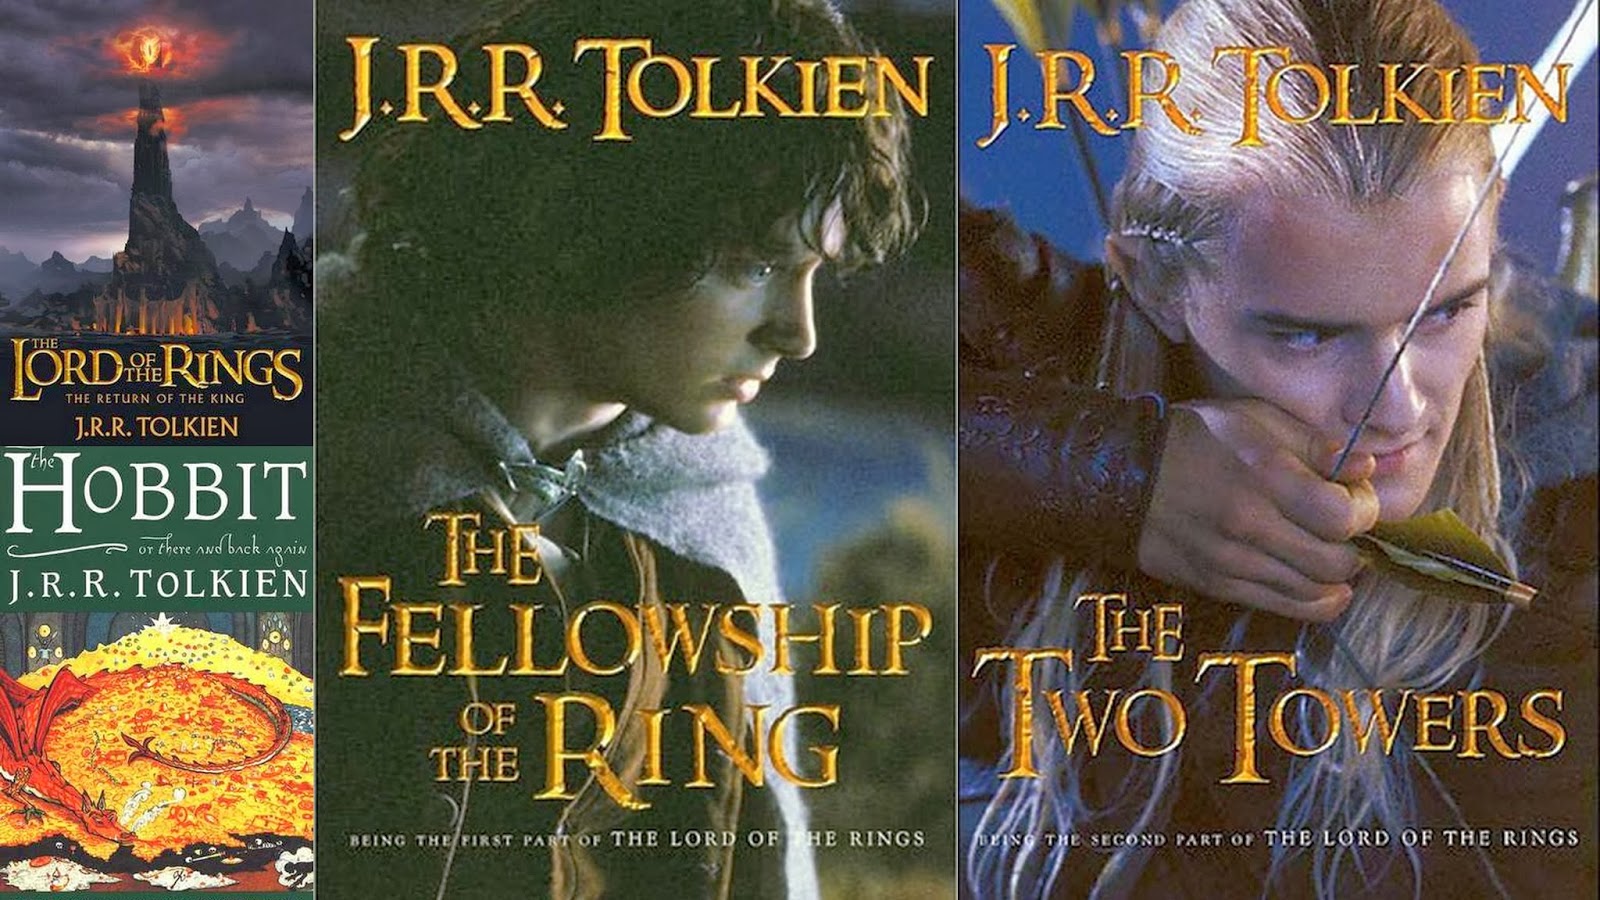 Audio Books Online: The Lord of the Rings Audiobooks